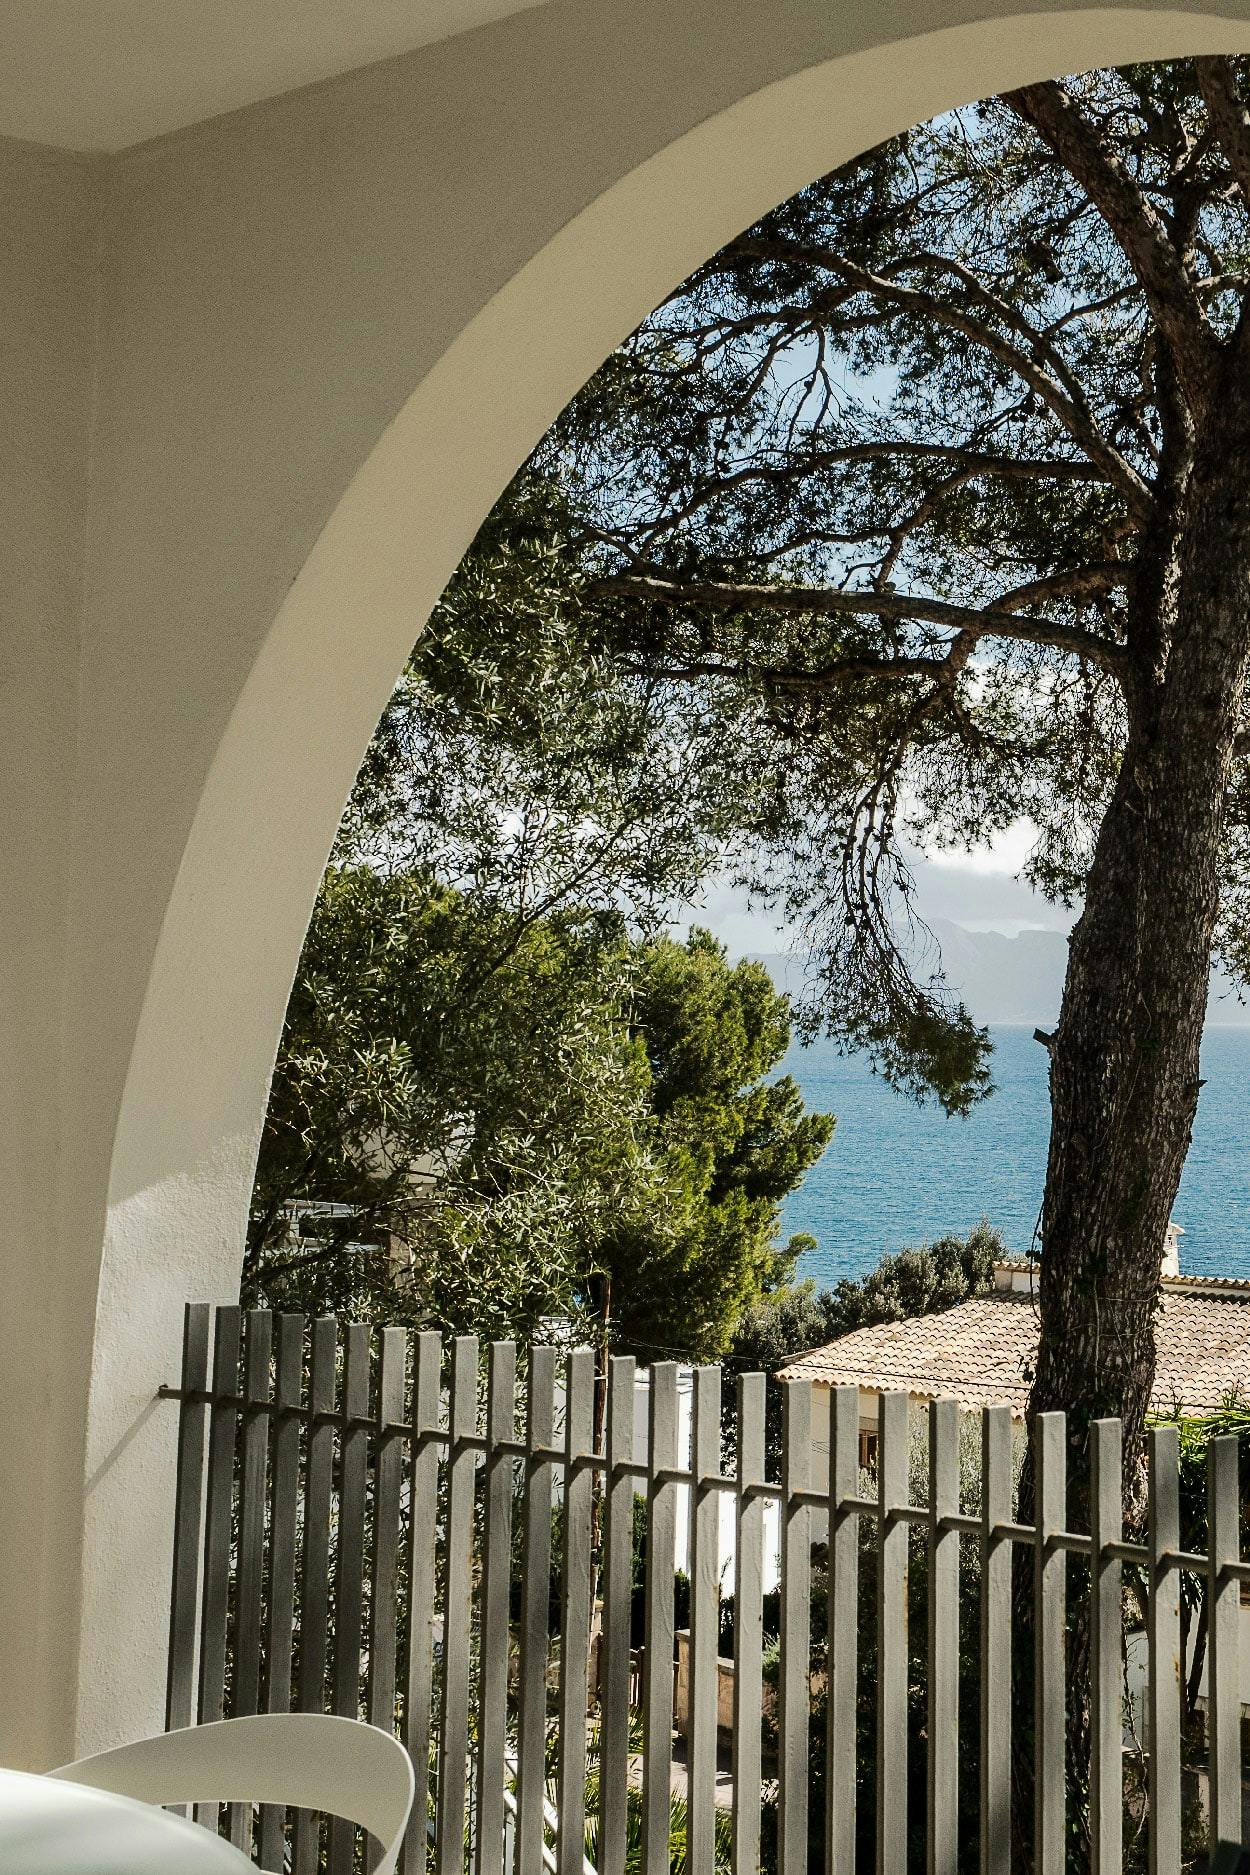 A large tree is in the center of a white fence, with a view of the ocean through a large archway.